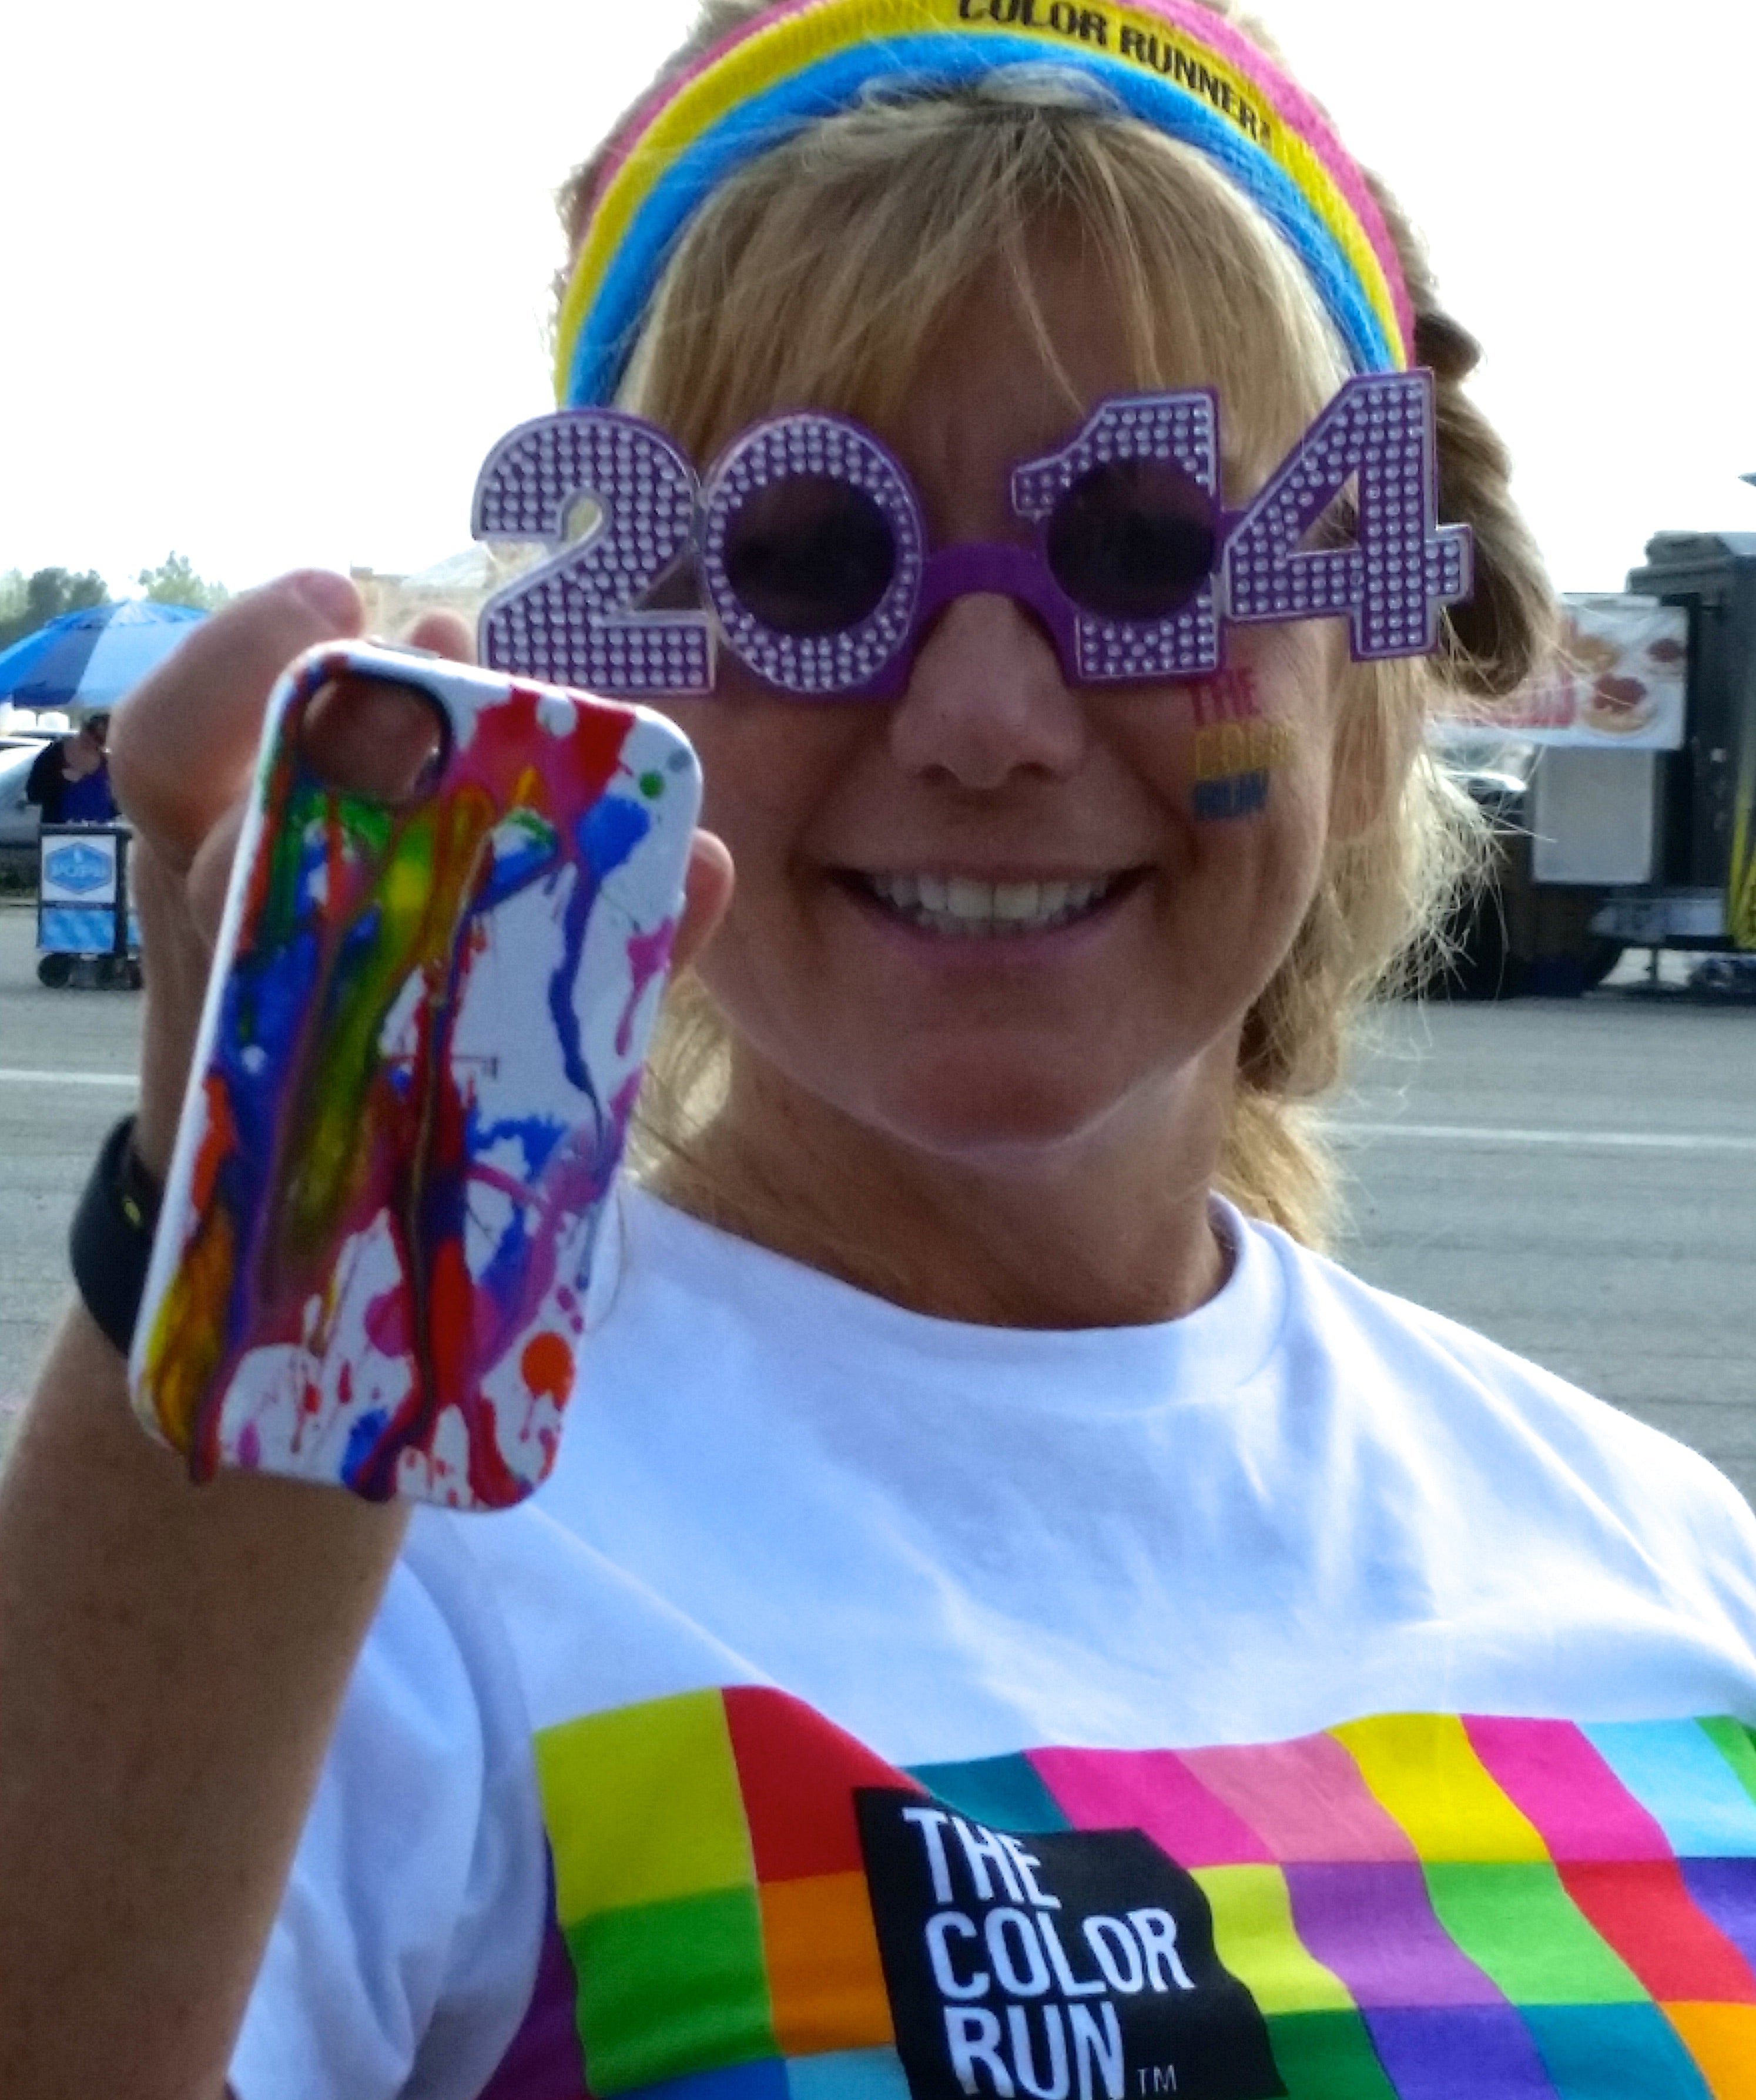 Speck hits the road to The Color Run, Orange County